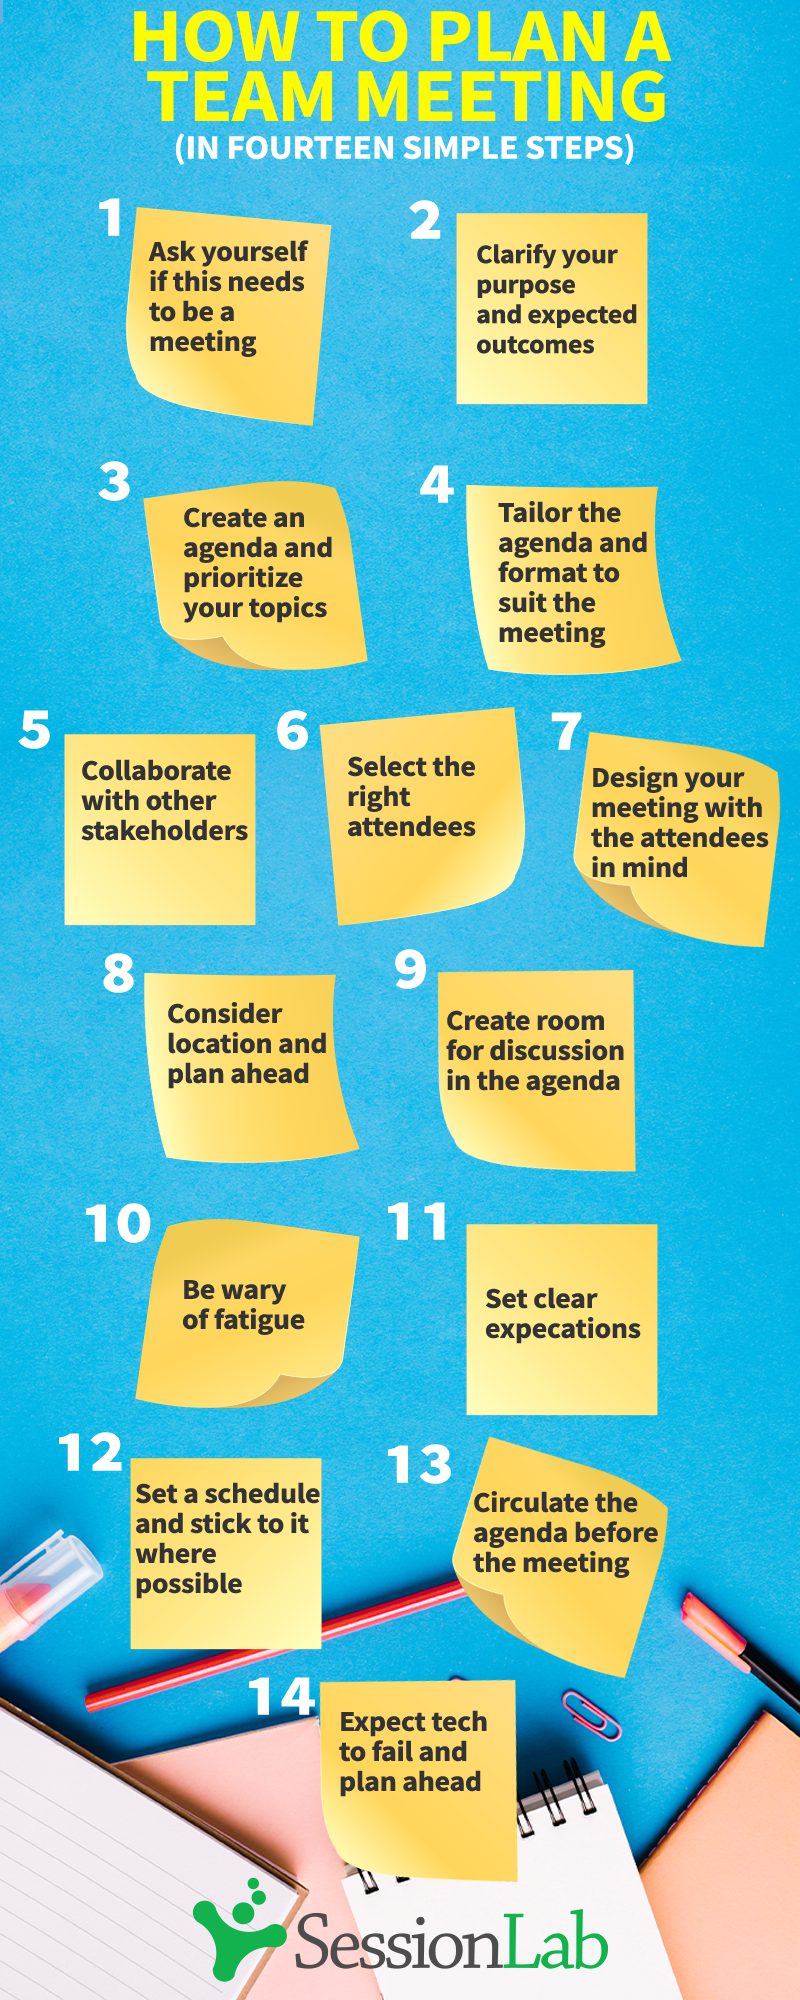 https://www.sessionlab.com/wp-content/uploads/how-to-plan-meeting-infographic.jpg